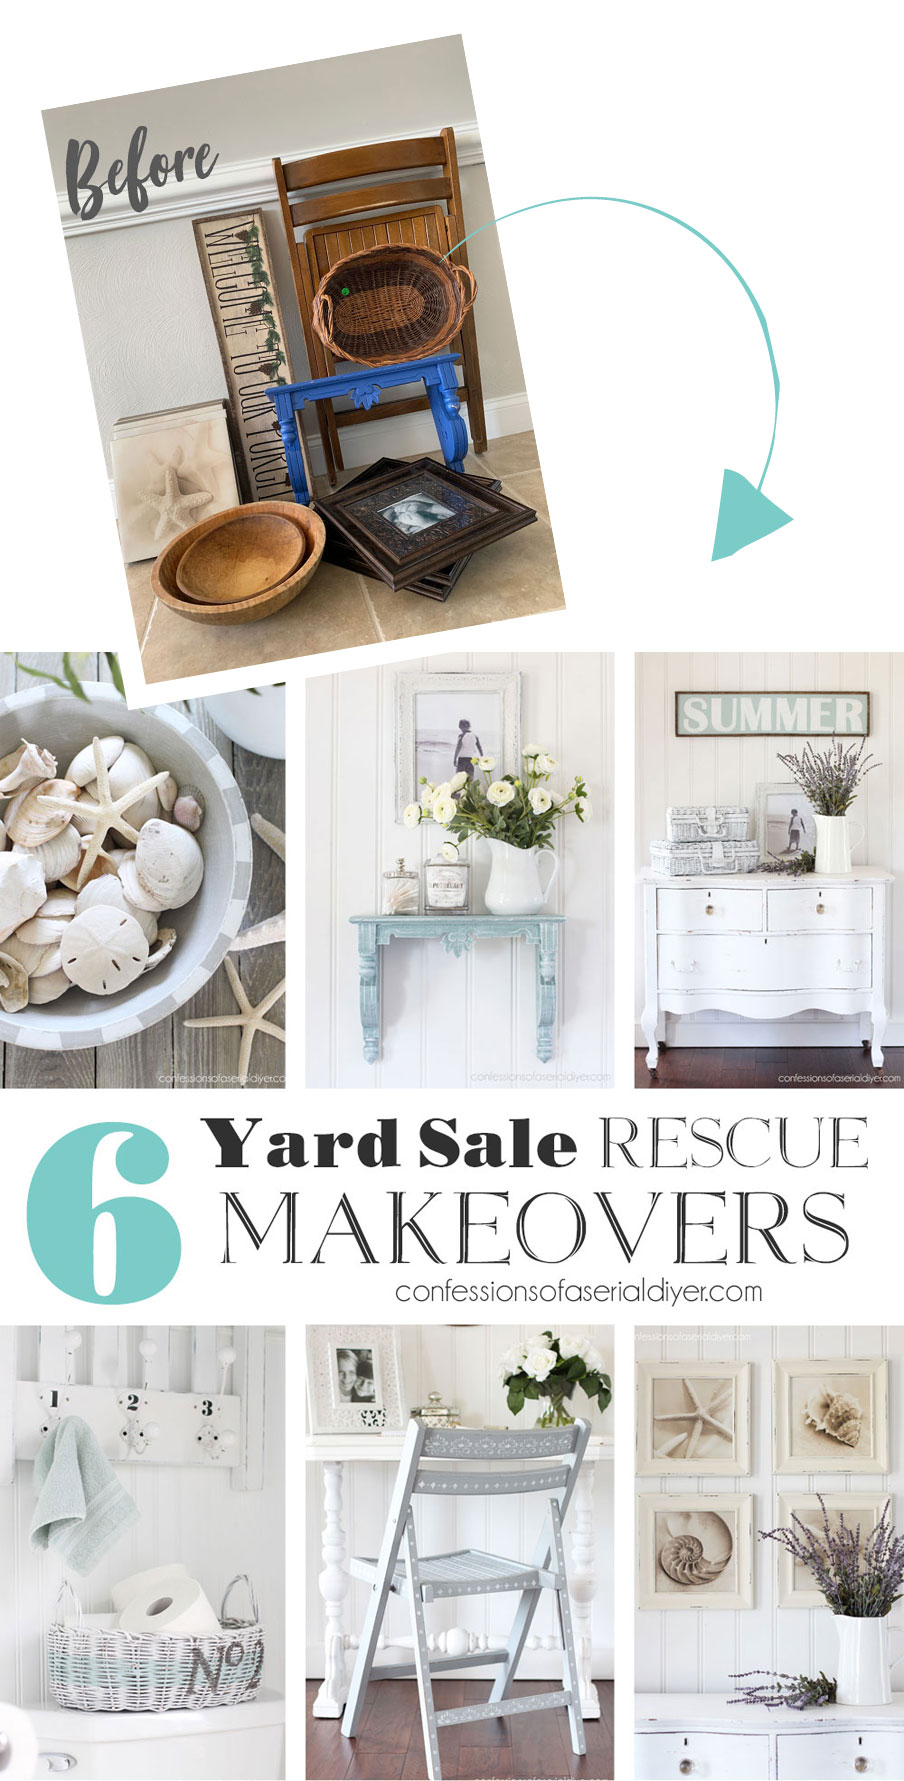 Yard Sale Items makeovers